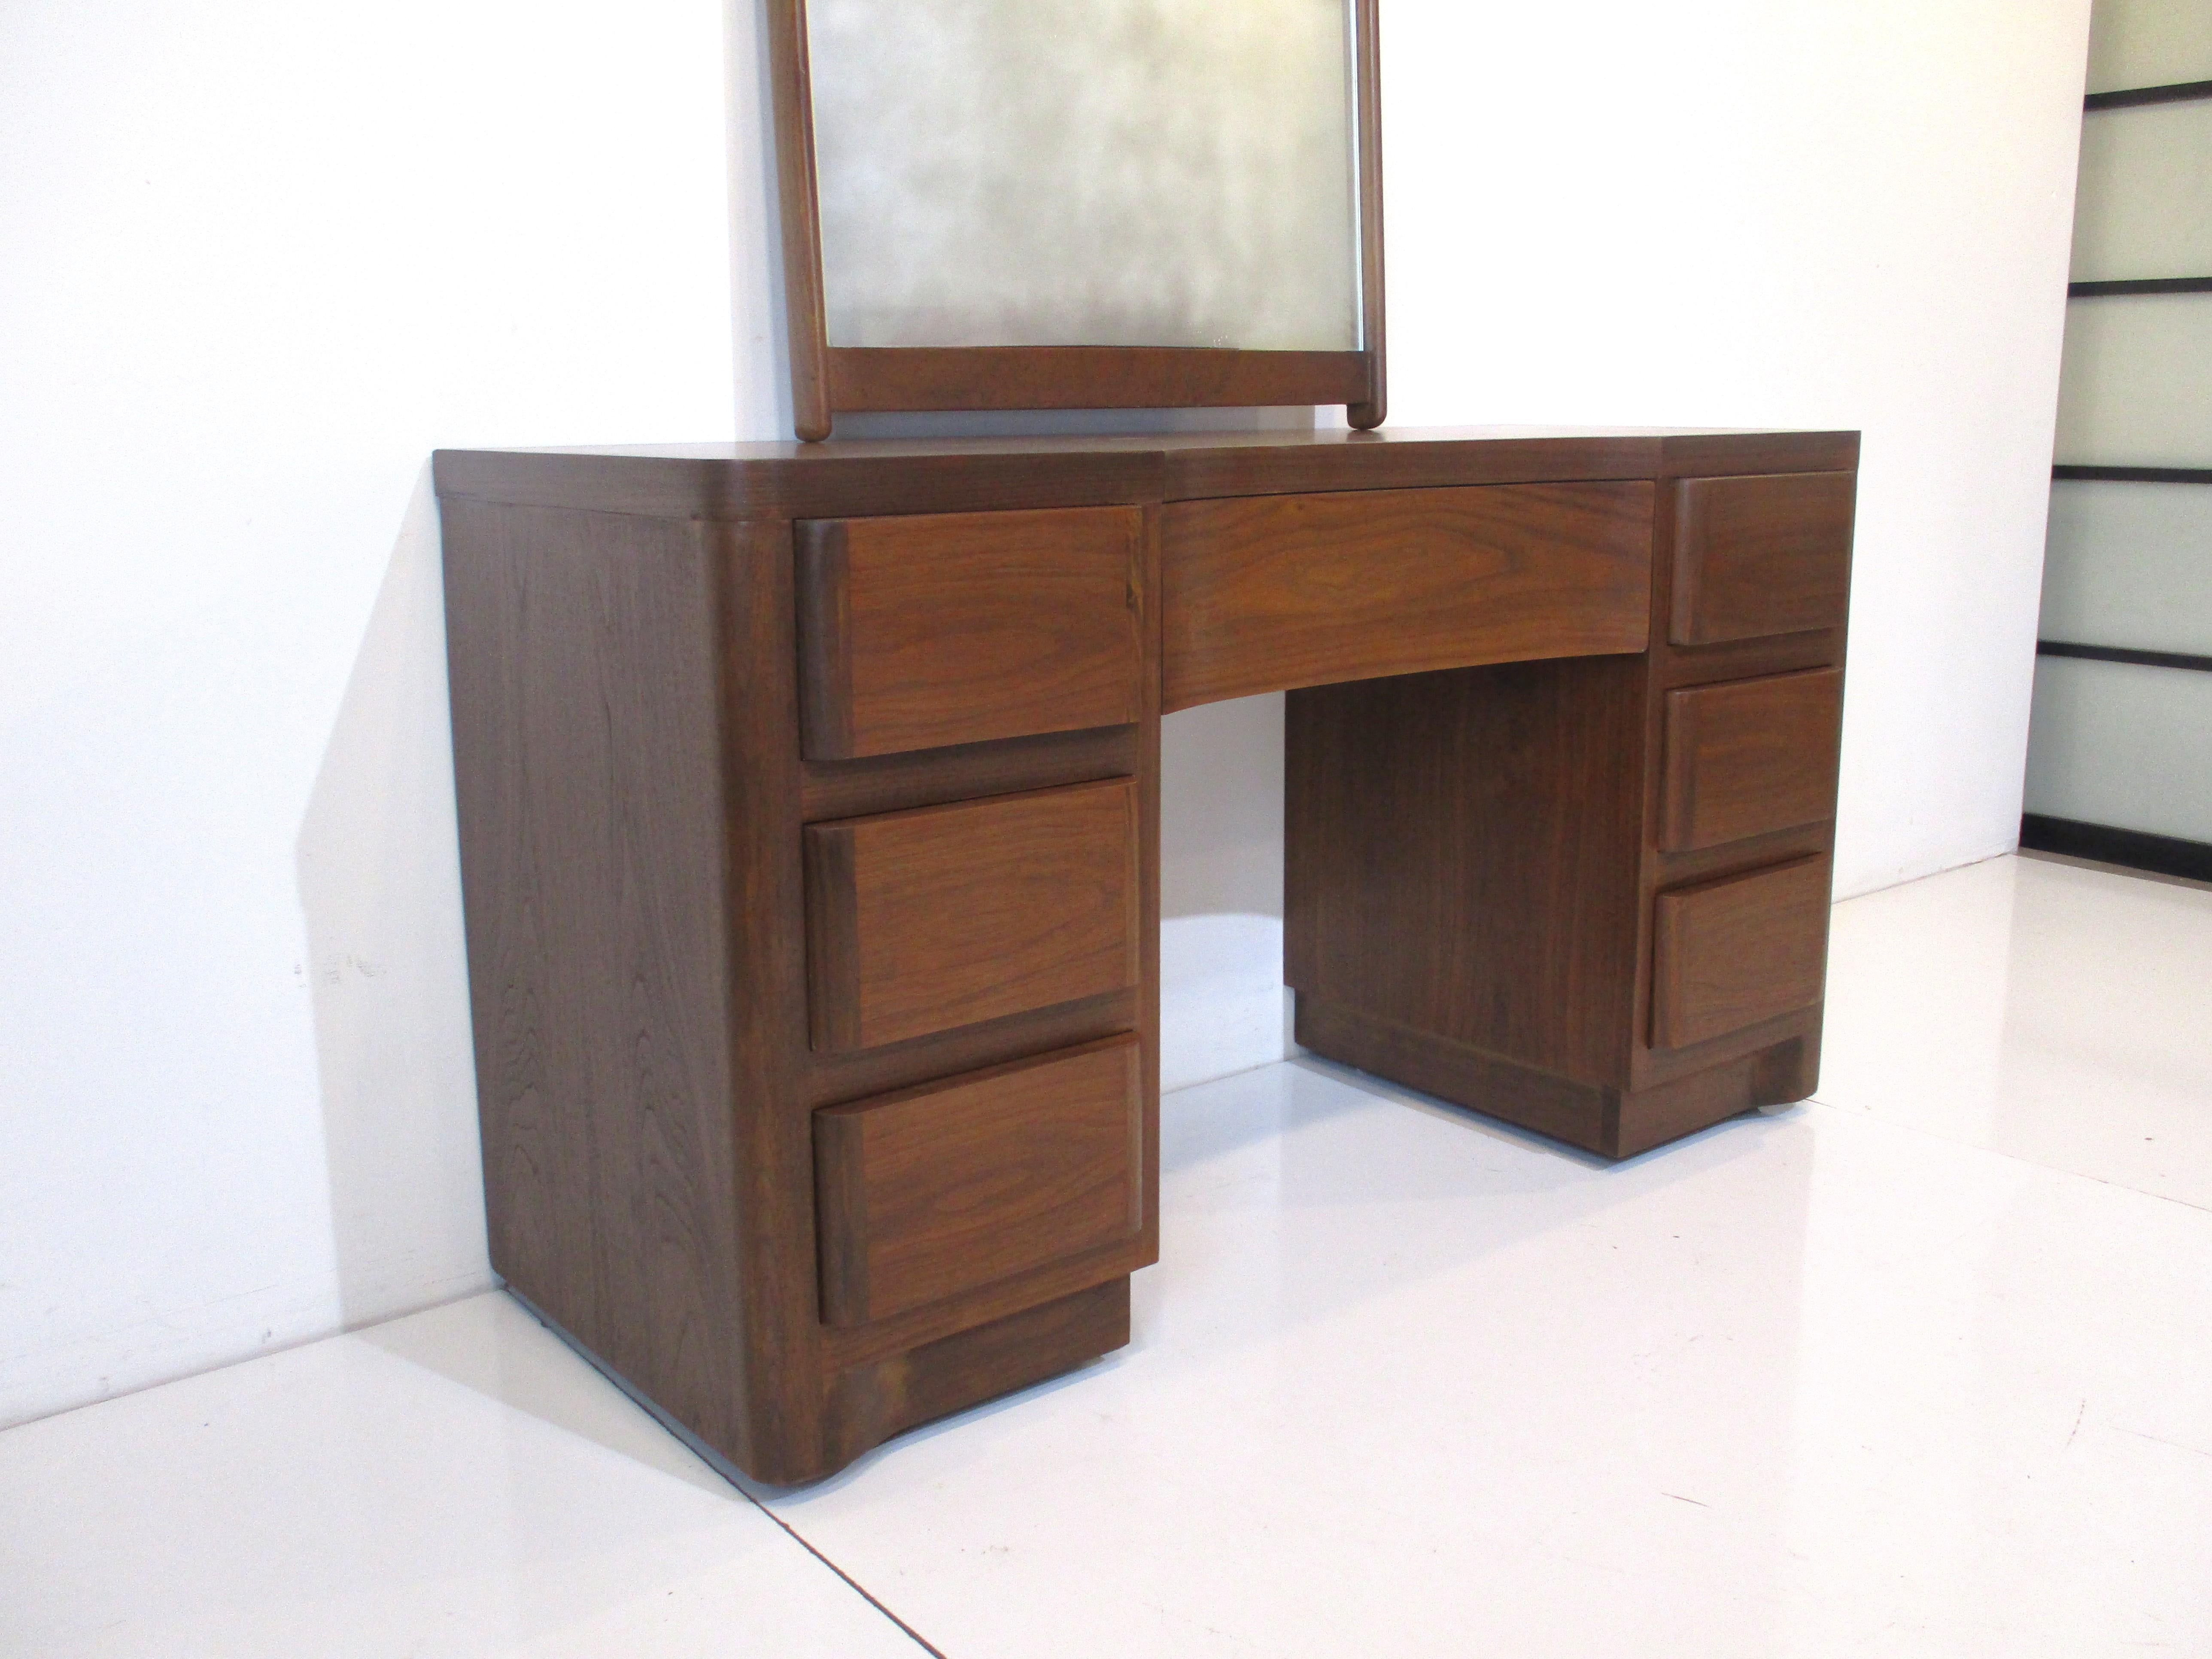 A midcentury walnut vanity with seven drawers one middle and three to each side well crafted in the manner of the Widdicomb furniture company. Having rounded drawer ends, wonderful graining to the wood and a nice cut out for your seating with a